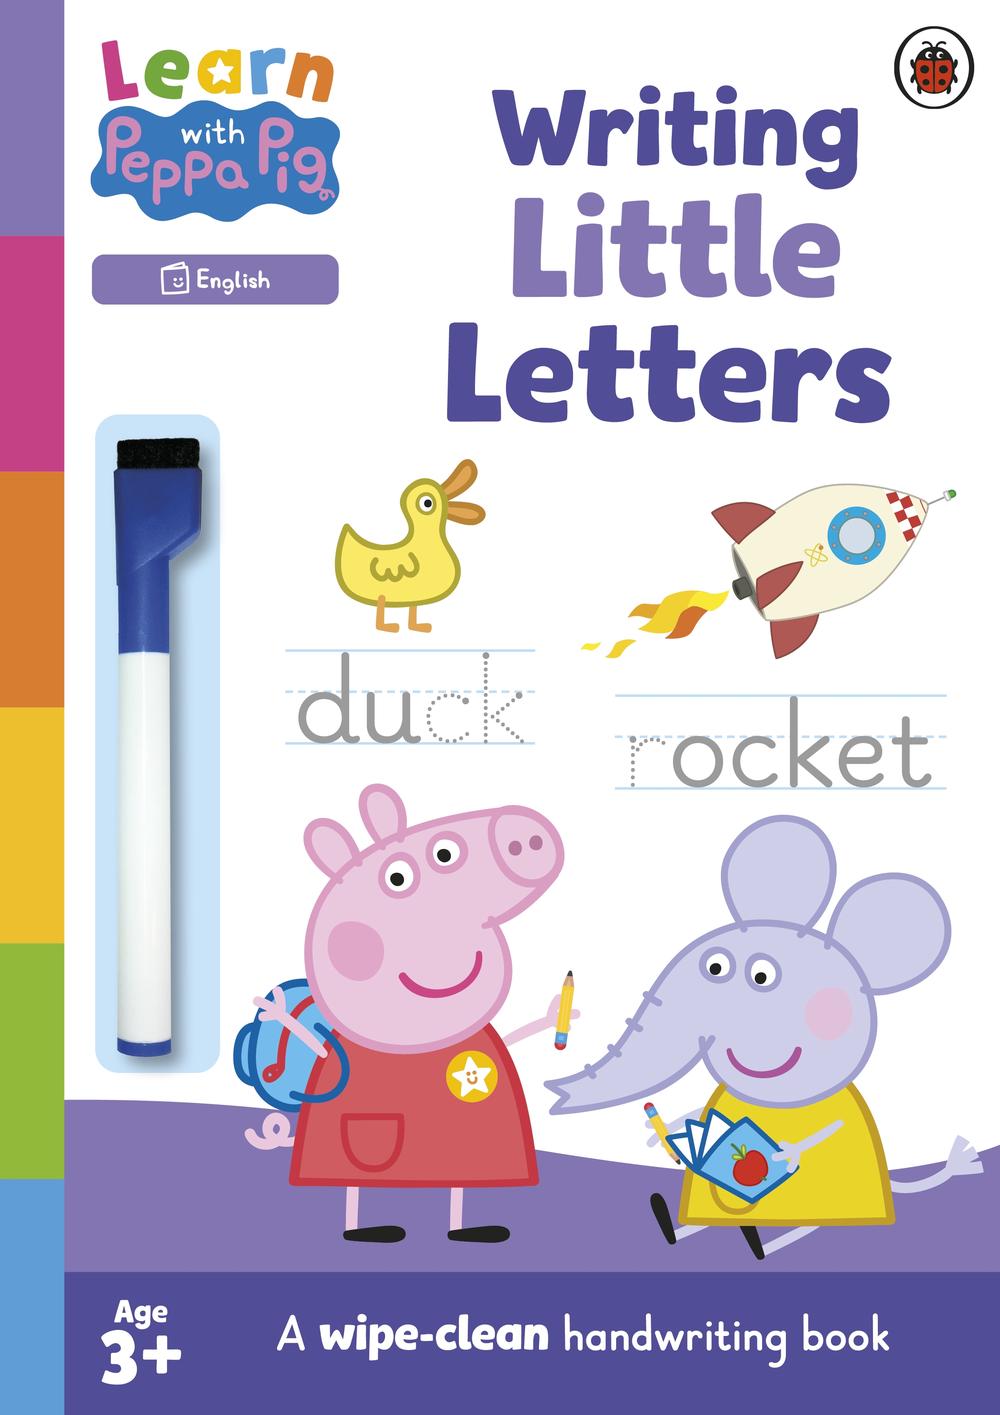 9780241601778　Peppa:　Writing　Nile　Big　Pig,　Letters　by　Peppa　Paperback,　Buy　online　at　The　Learn　With